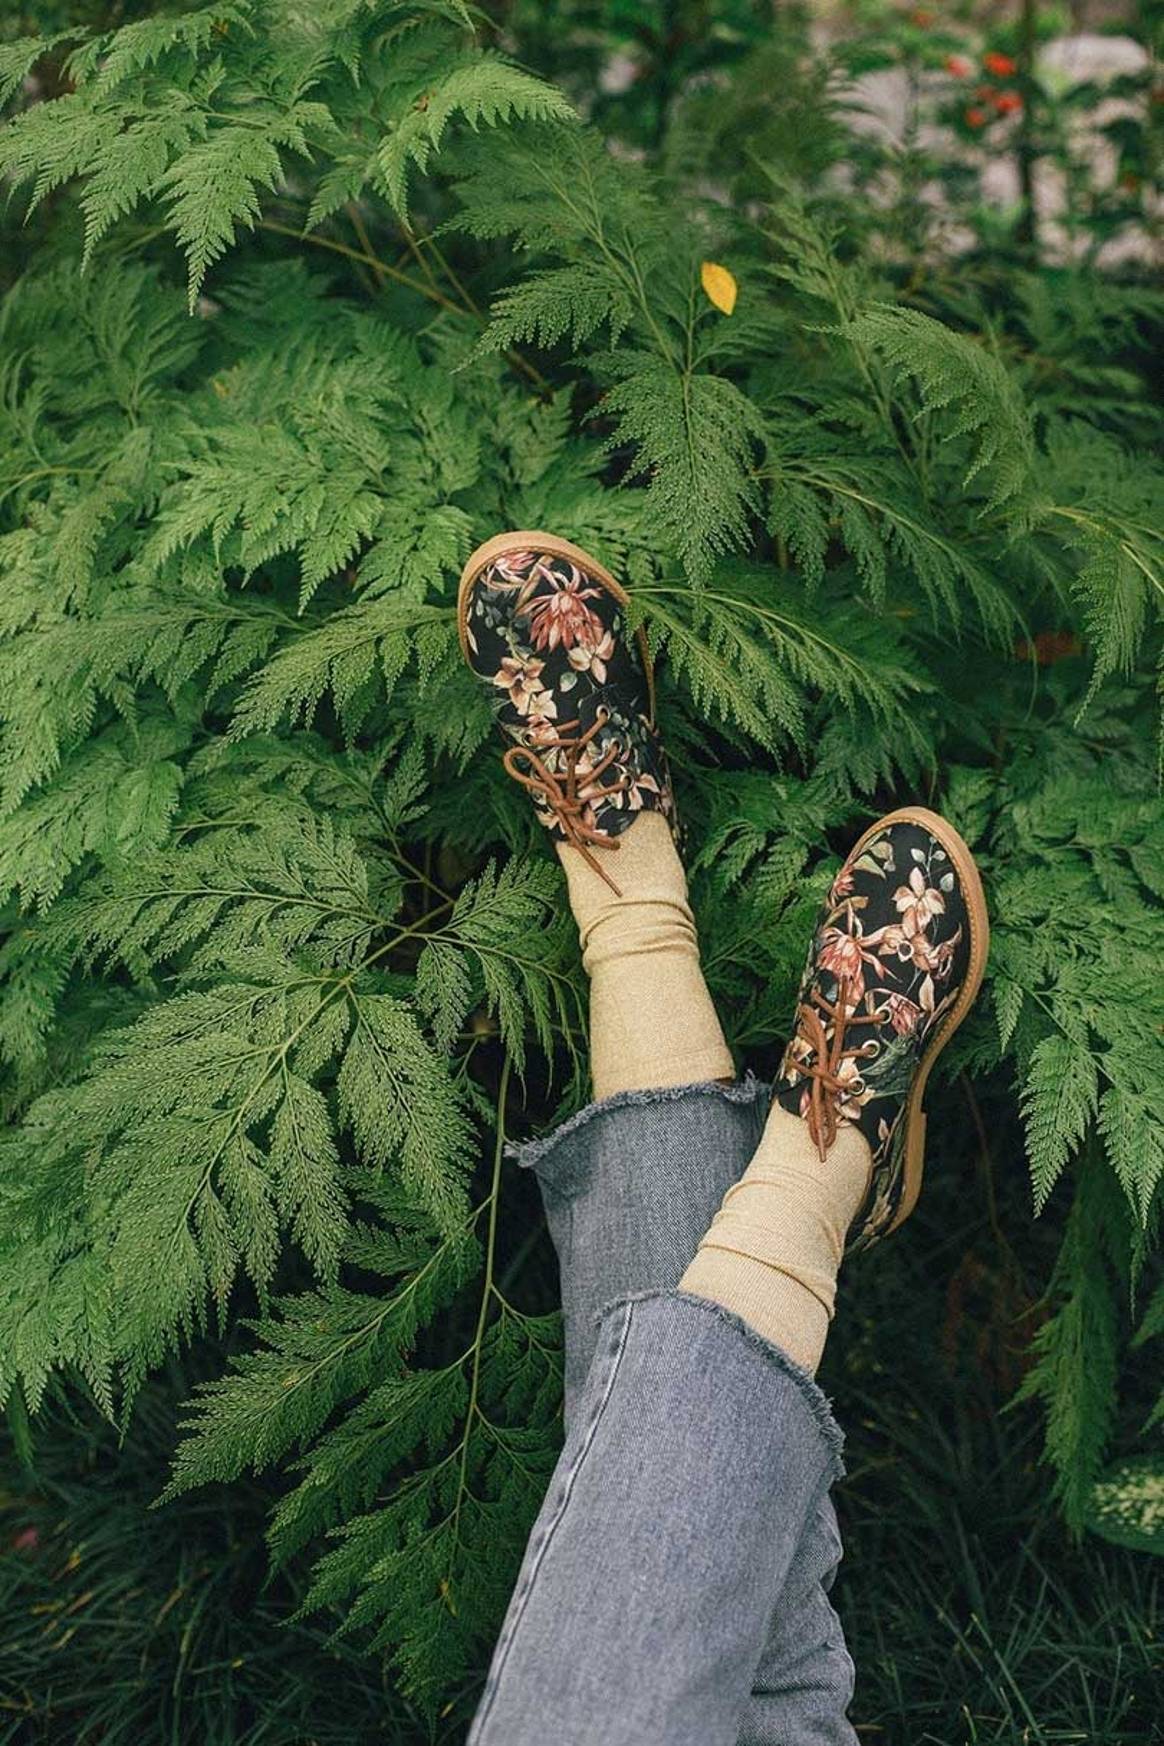 Vegan fashion: Brazilian brand Insecta Shoes wants to take over EU and North America